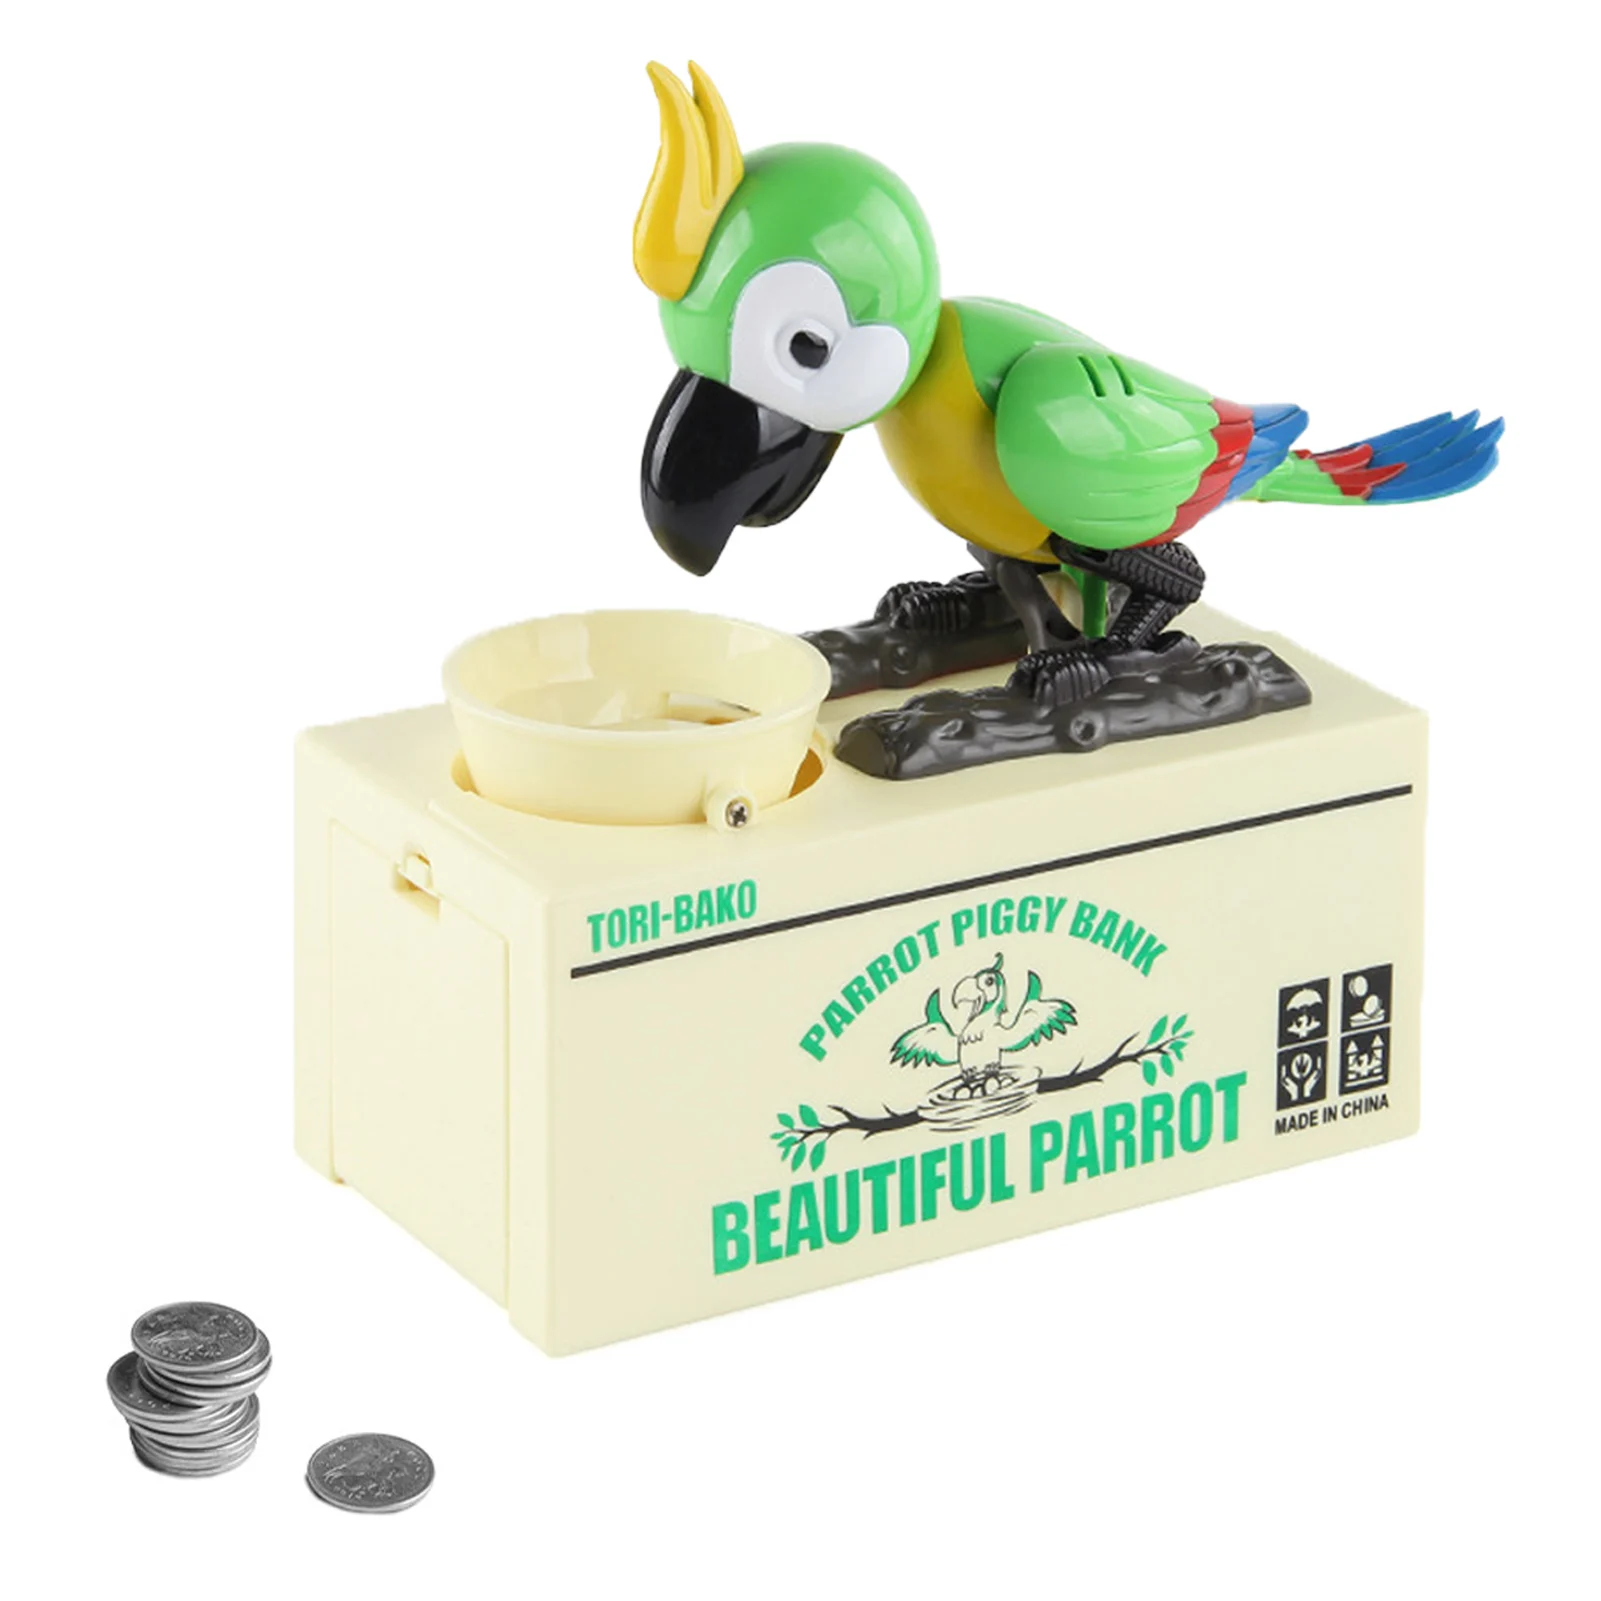 

Money Saving Coin Bank Hungry Eating Parrot Puggy Bank Battery Powered Robotic Coin Munching Toy Cute Electric Money Penny Cents